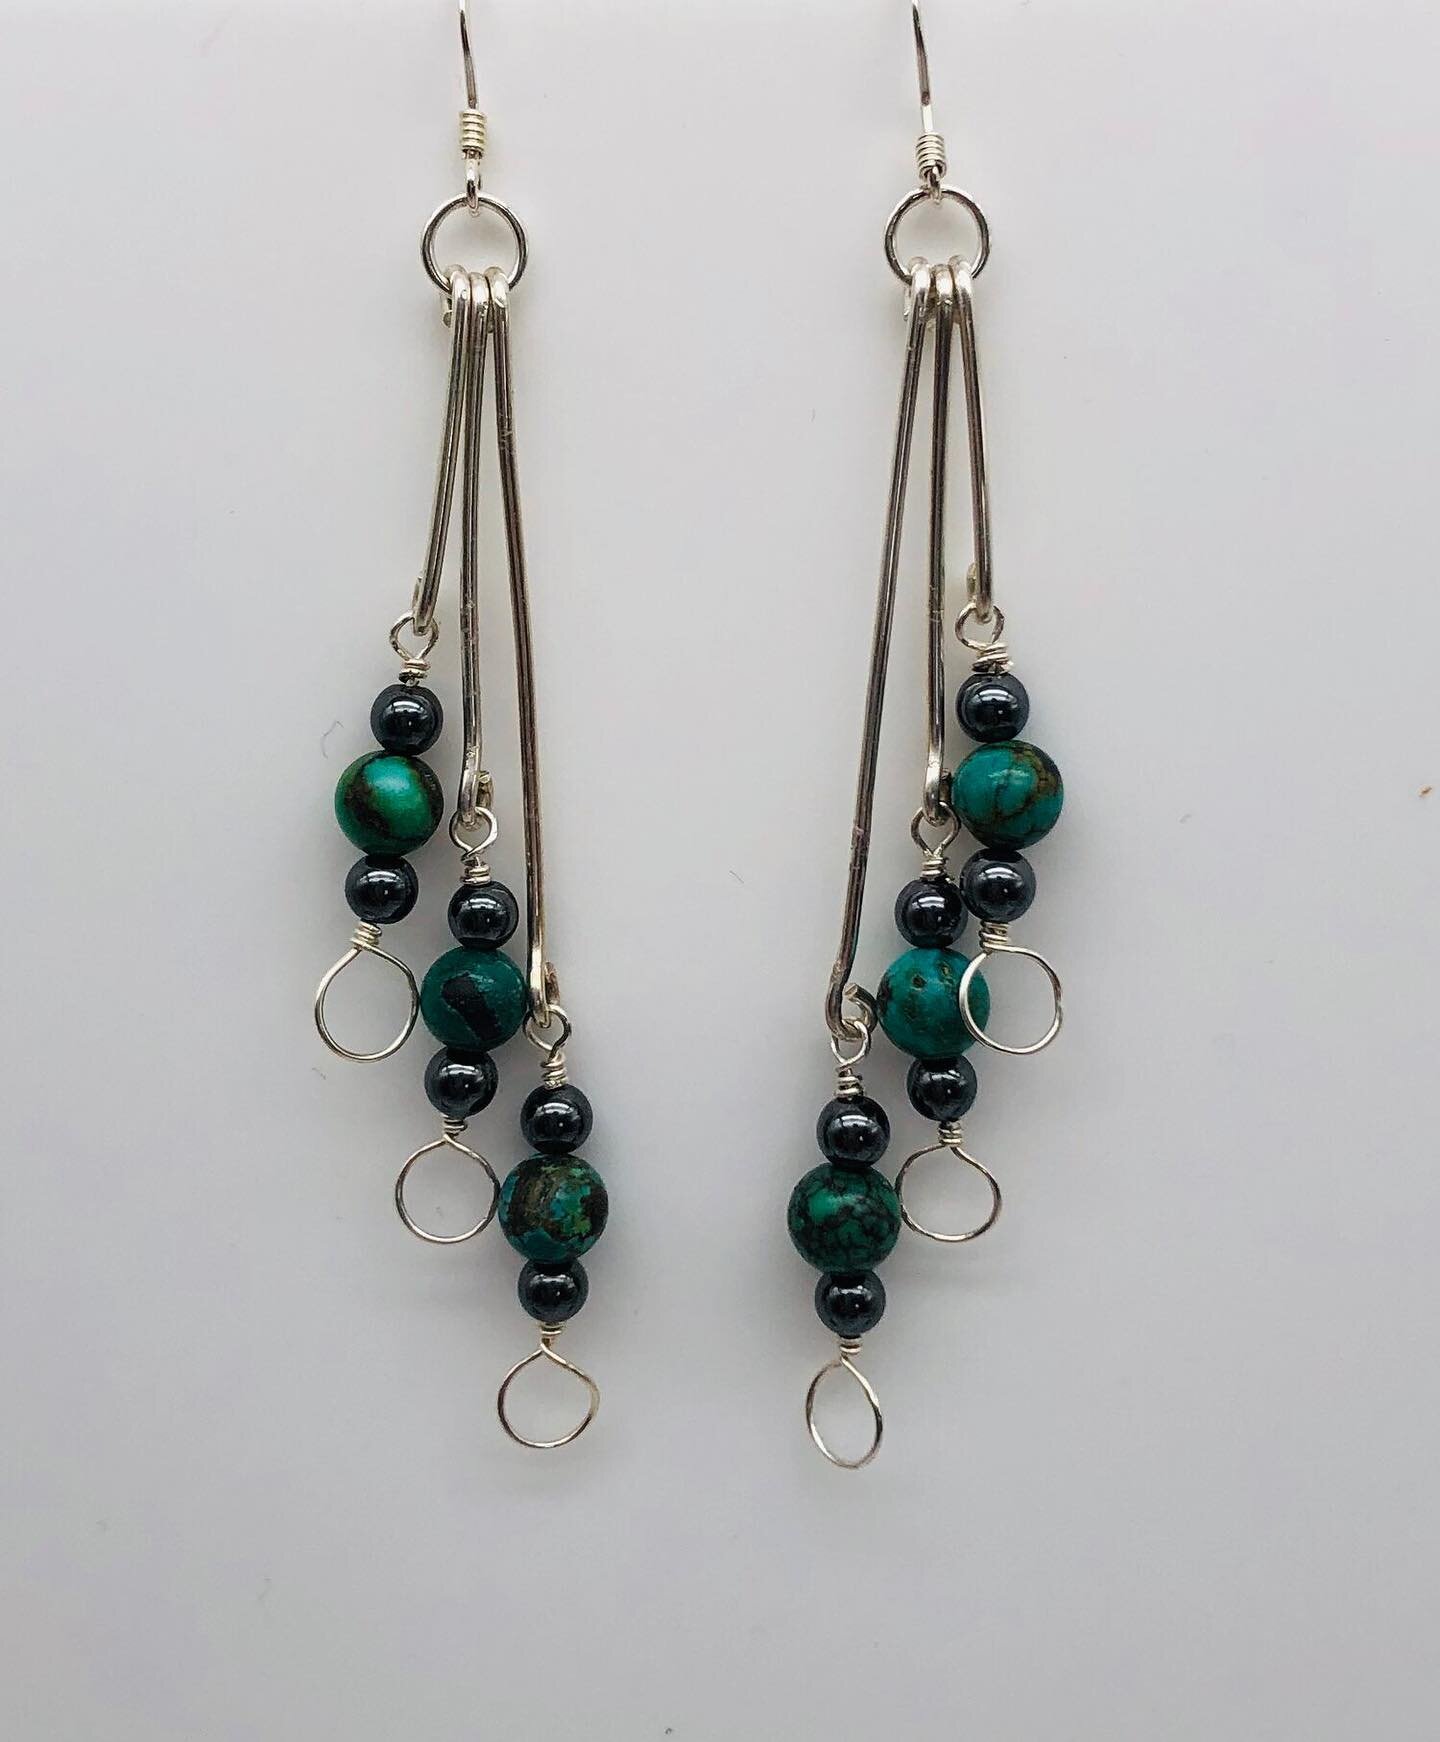 Warm strumming, reminiscent of the mojave deserts heat carried on the wind. To your knowledge, live music had died when lockdown had started, but not for the woman performing across the street.

Inspired by real women, these customizable earrings mad